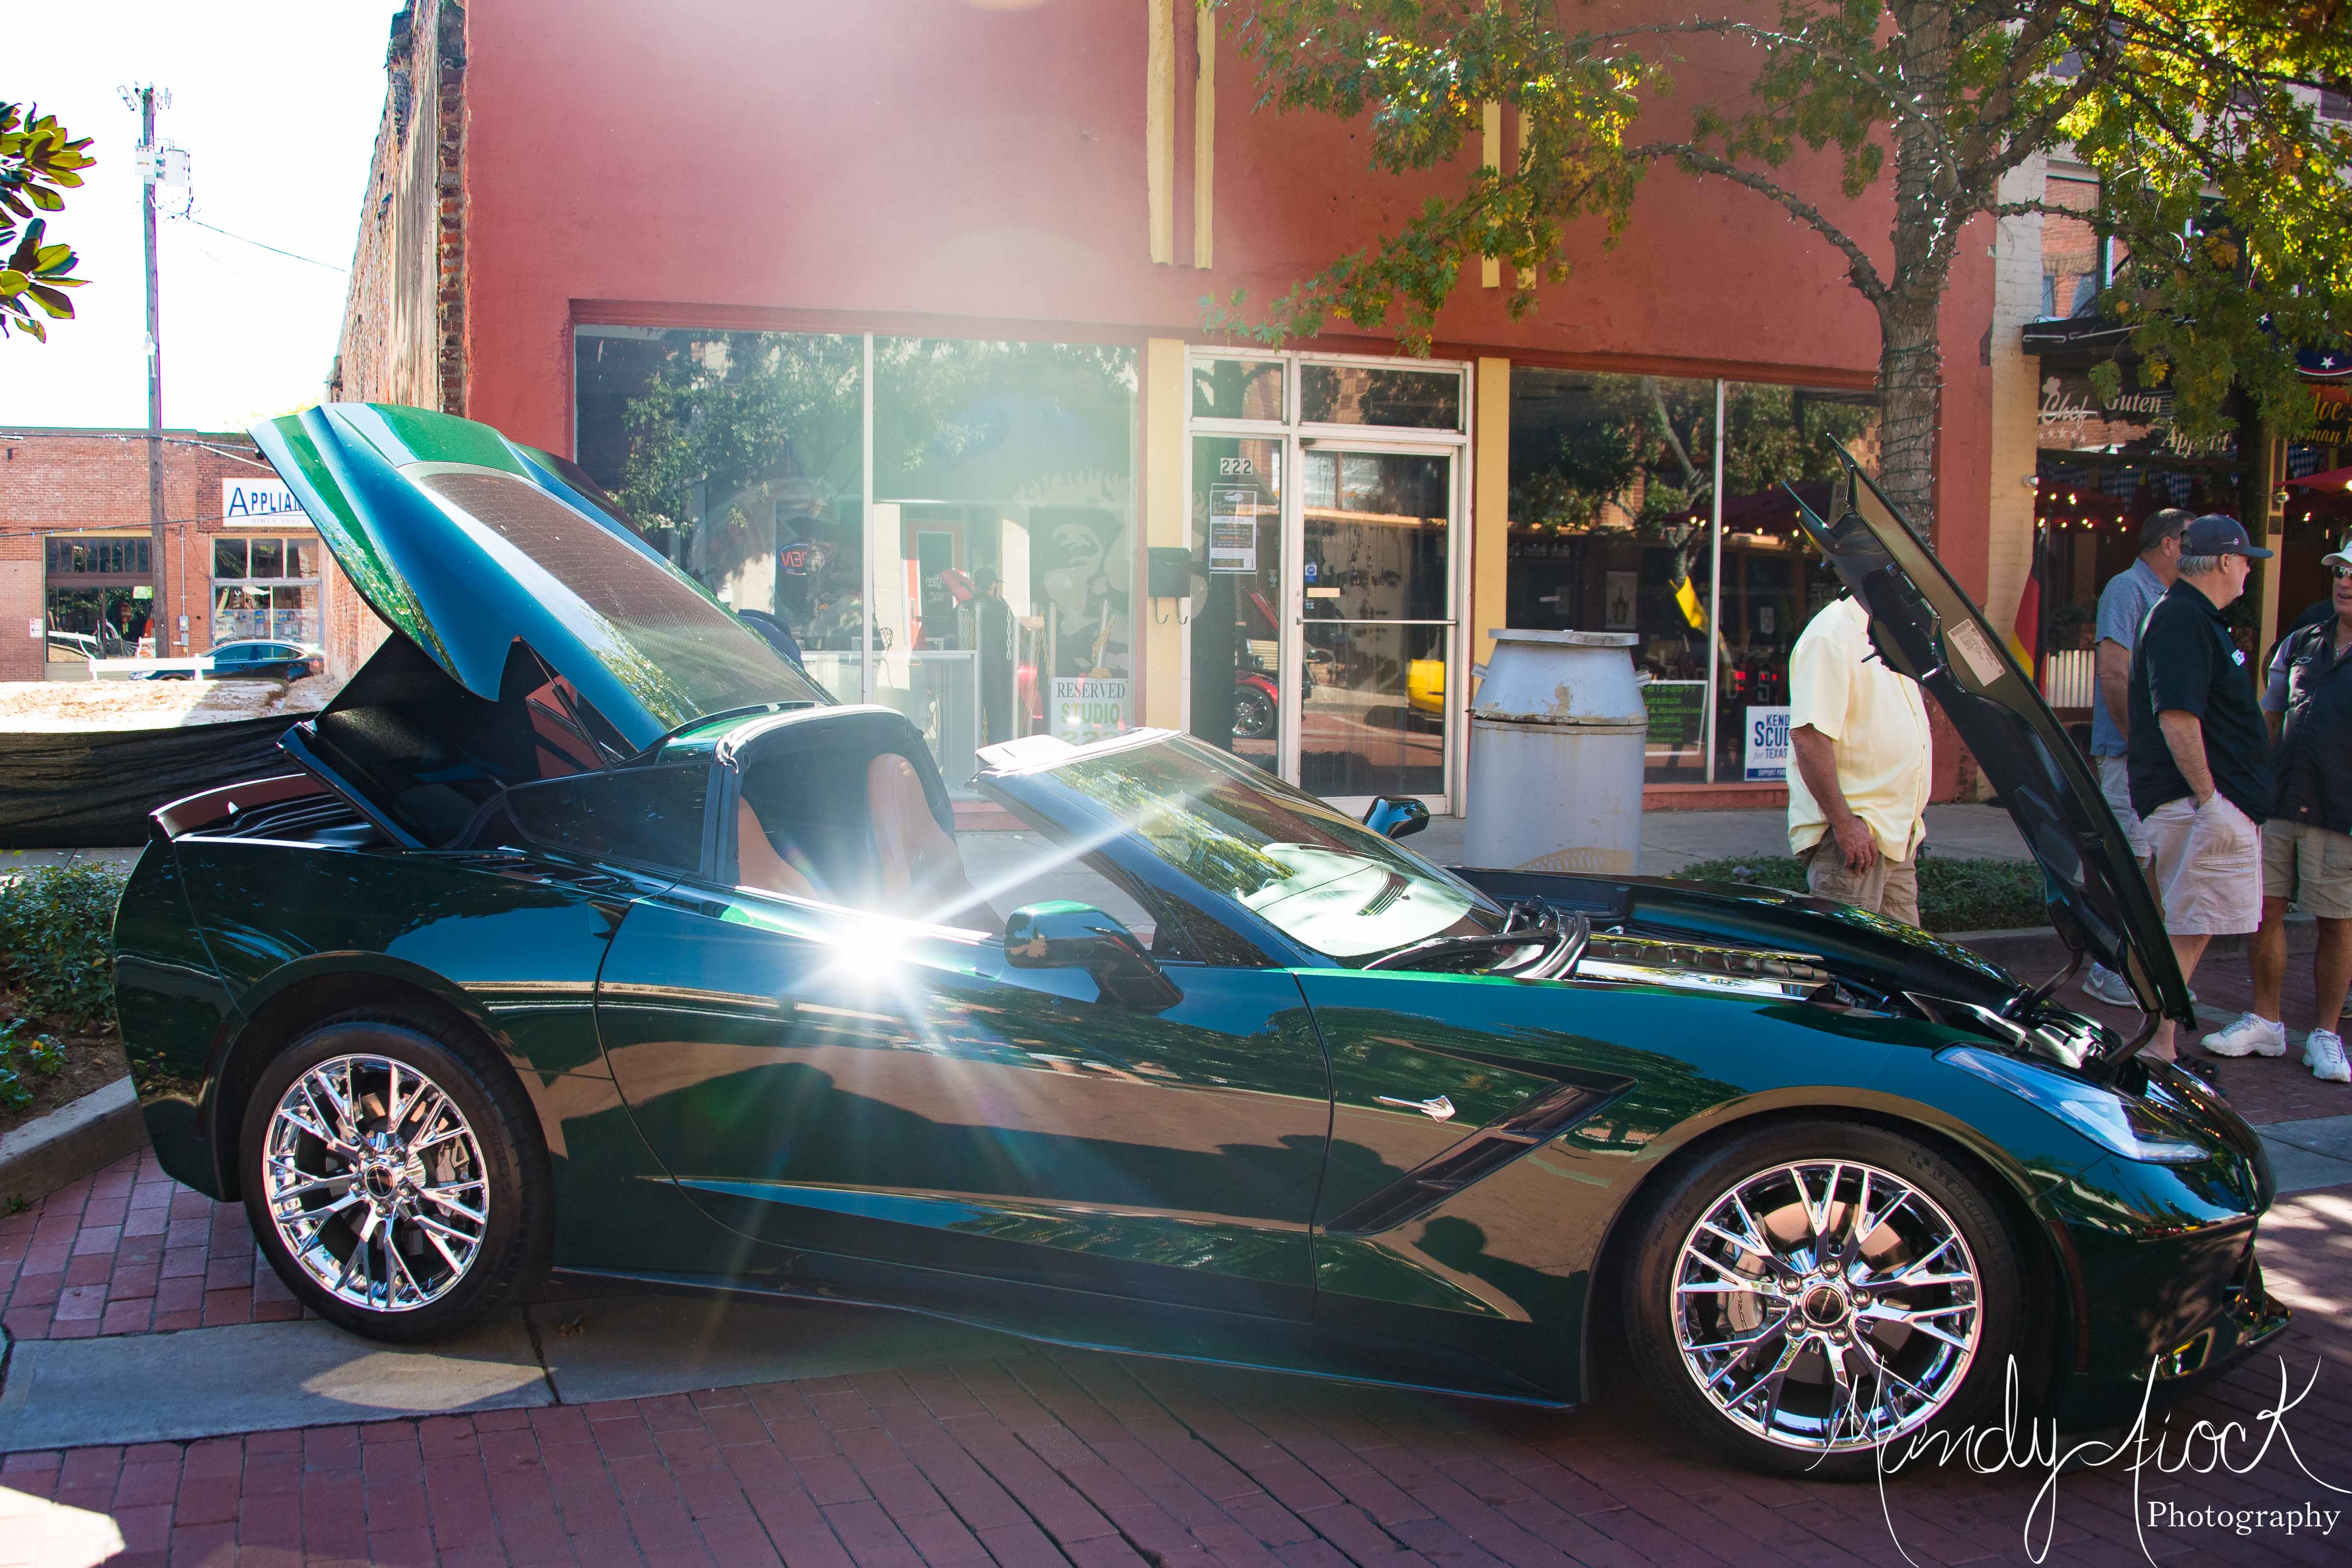 Photos from ‘Corvettes on the Plaza’ by Mandy Fiock Photography